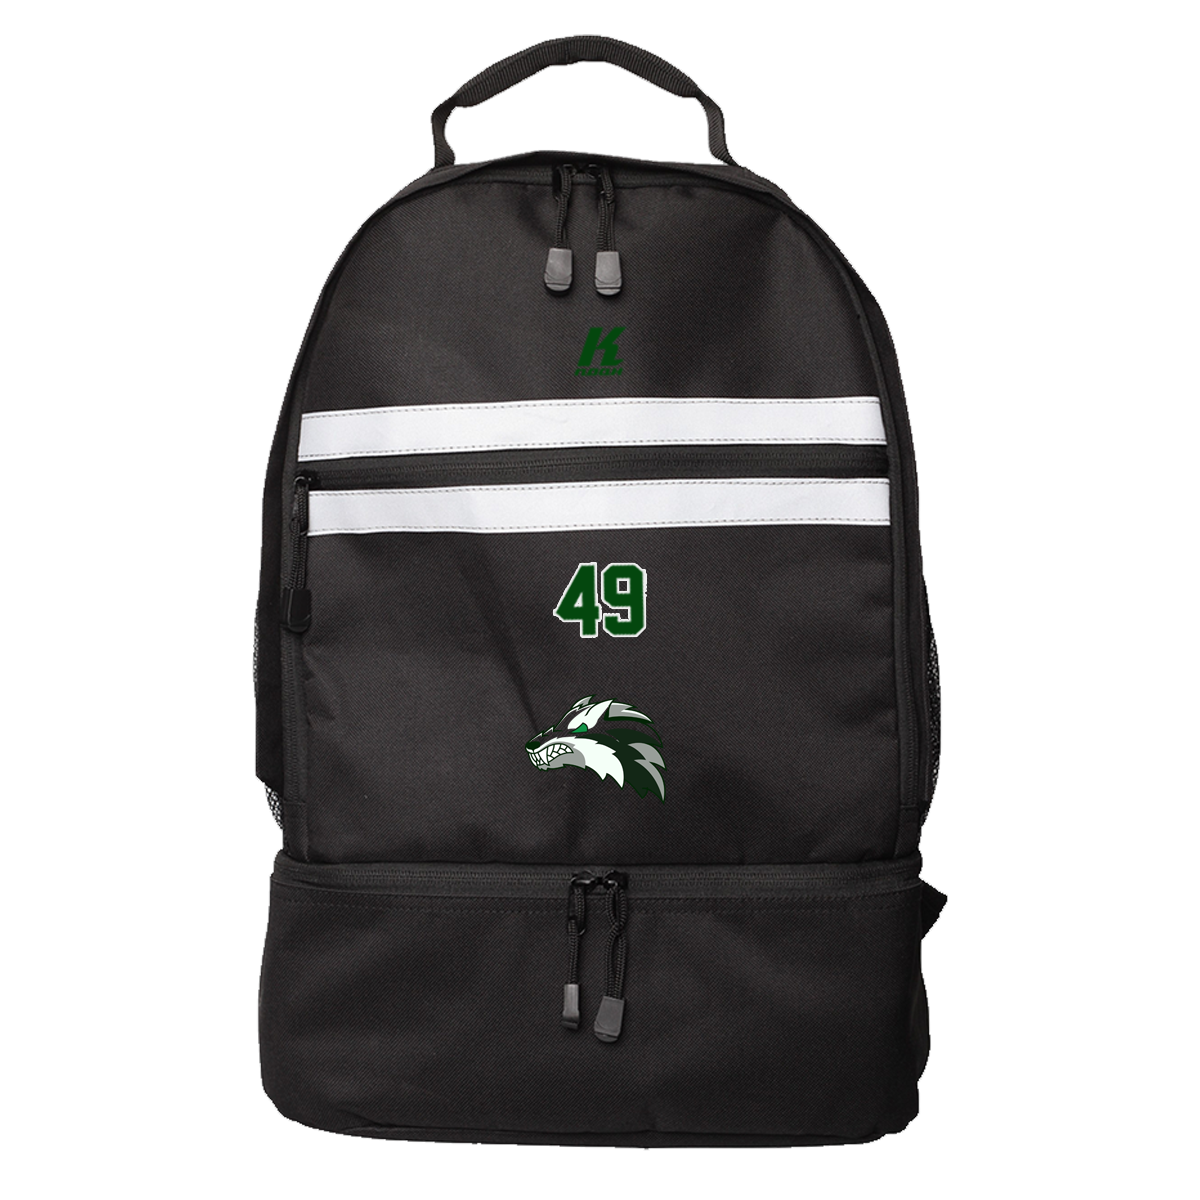 Wolves Players Backpack with Playernumber or Initials